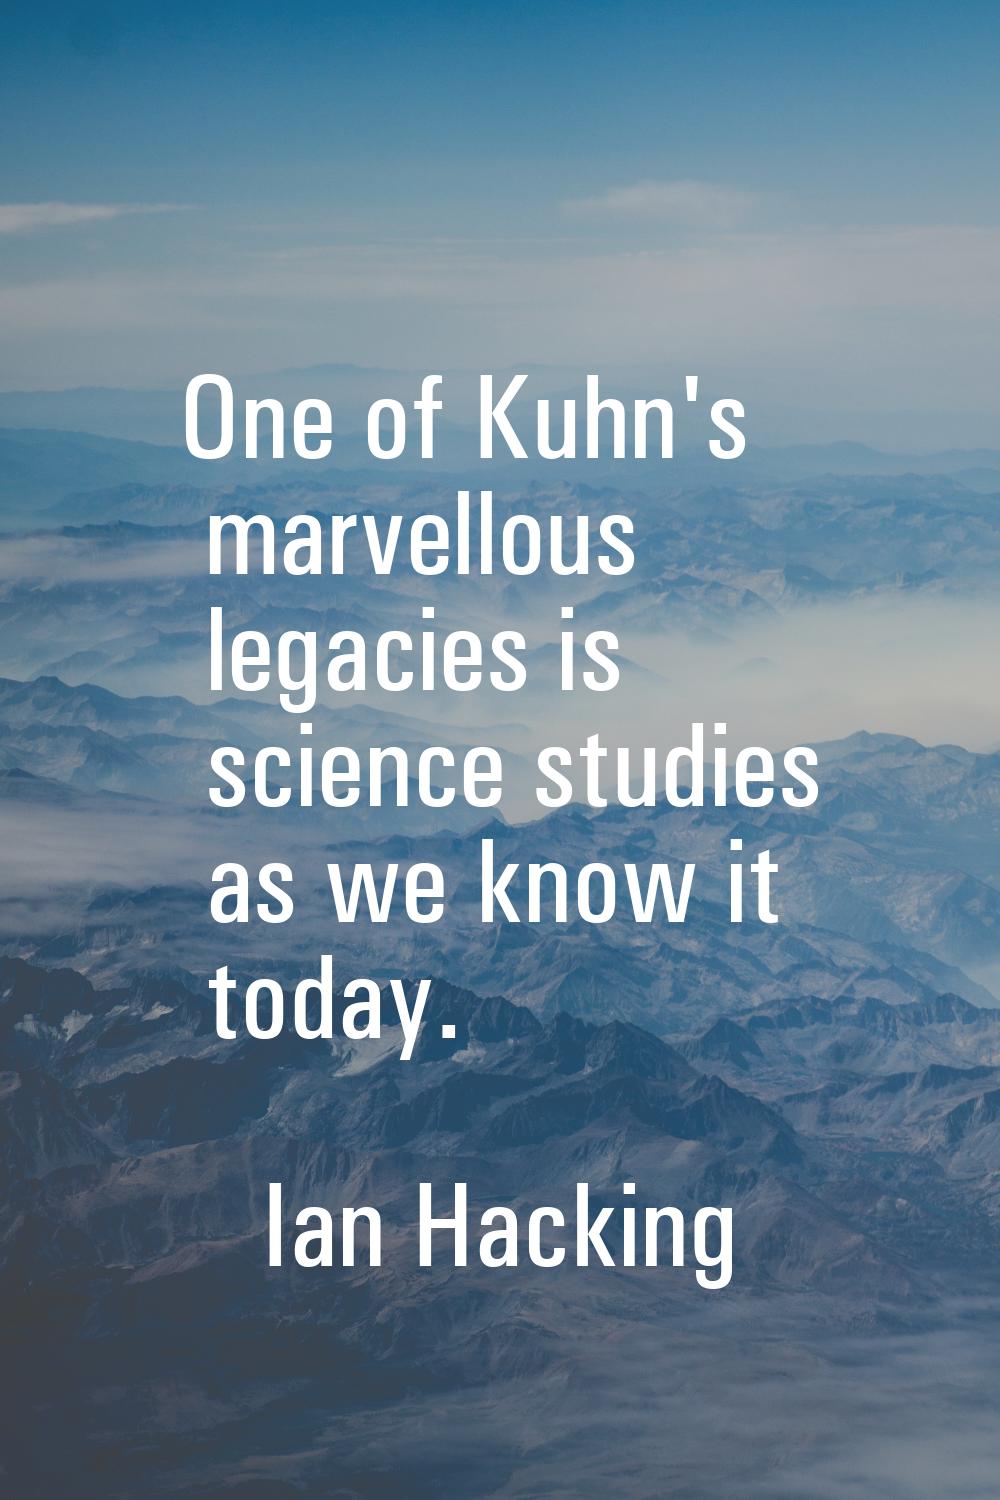 One of Kuhn's marvellous legacies is science studies as we know it today.